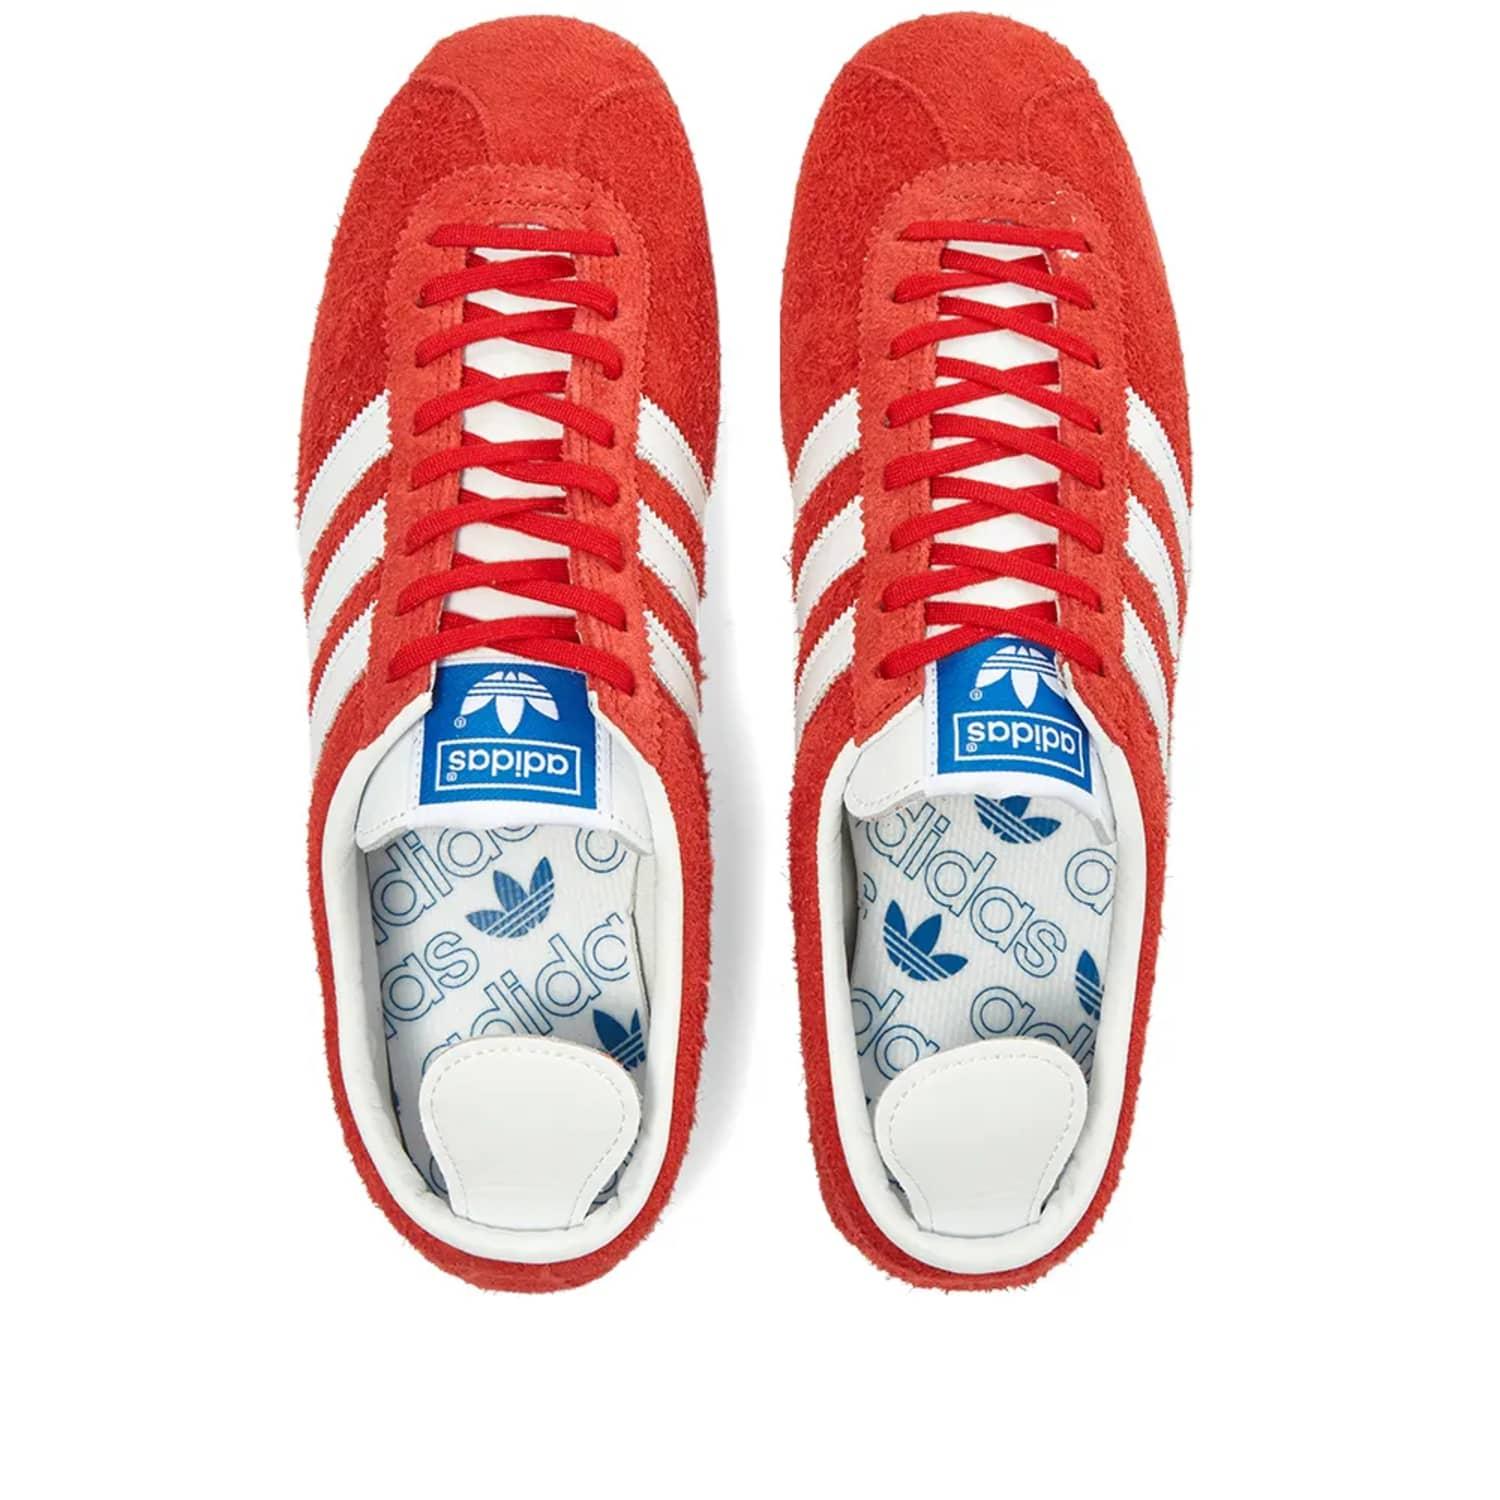 adidas Gazelle Vintage Shoes Scarlet Cloud White Gold Metallic in Scarlet,  White & Gold (Red) for Men | Lyst